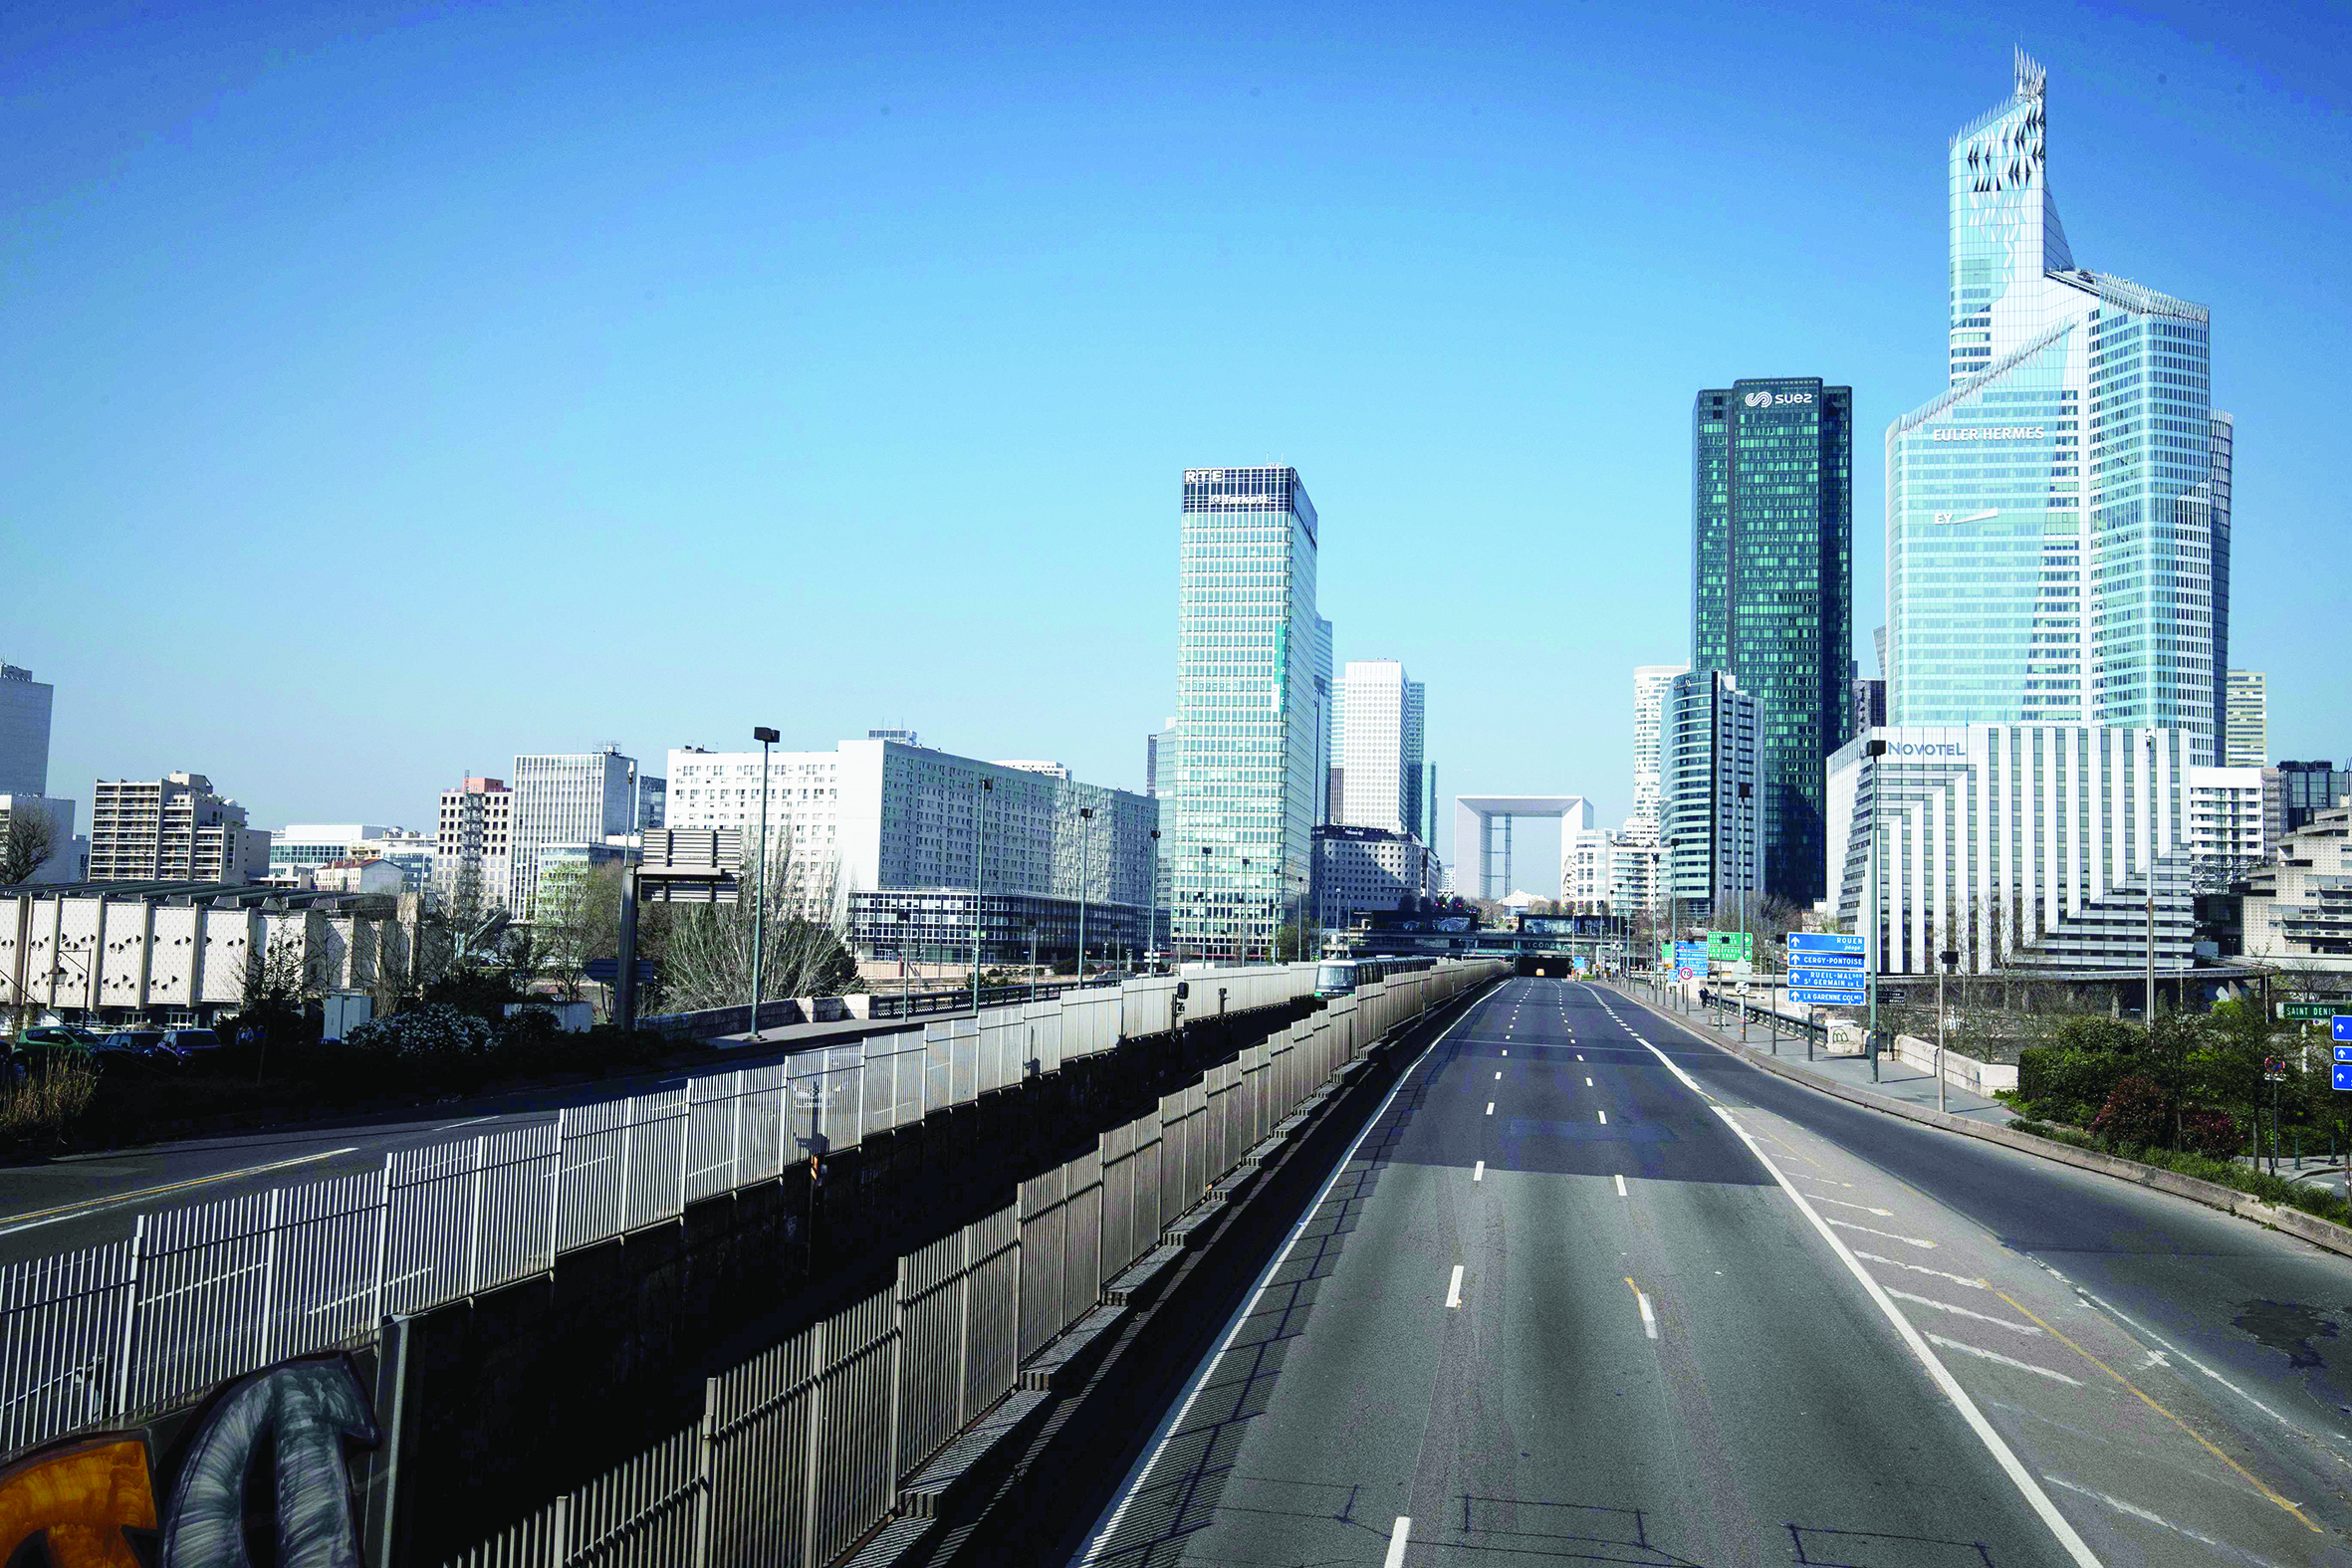 A picture taken on March 19, 2020 shows the empty motorway leading to the business district of La Defense, as a strict lockdown is in effect in France to stop the spread of COVID-19, caused by the novel coronavirus. (Photo by JOEL SAGET / AFP)